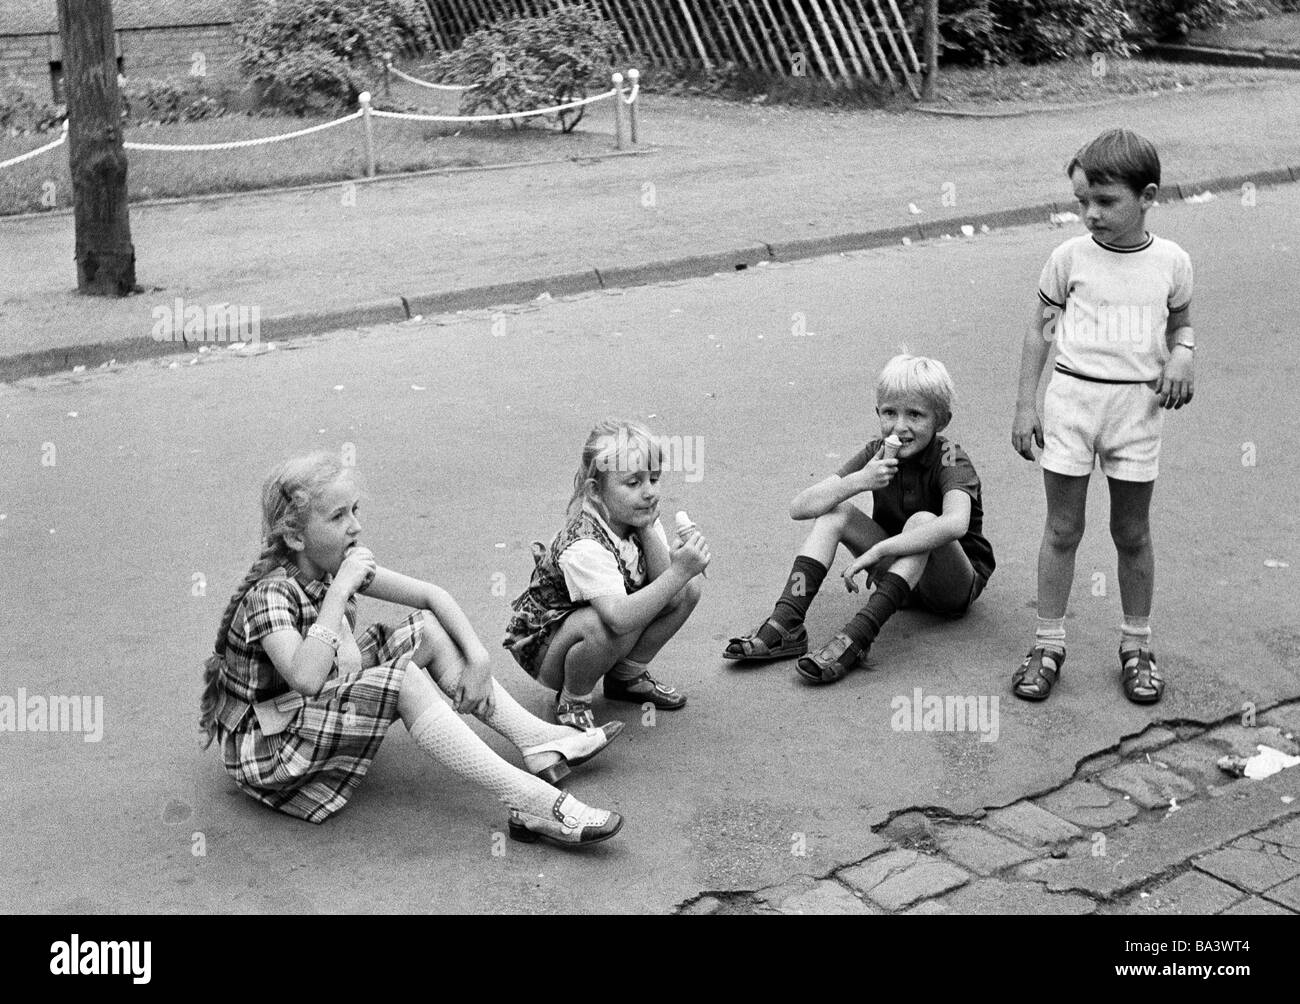 Seventies, black and white photo, people, children, two girls and a boy sitting on a street and lick ice cream, another boy stands beside them and looks envious, aged 5 to 9 years Stock Photo